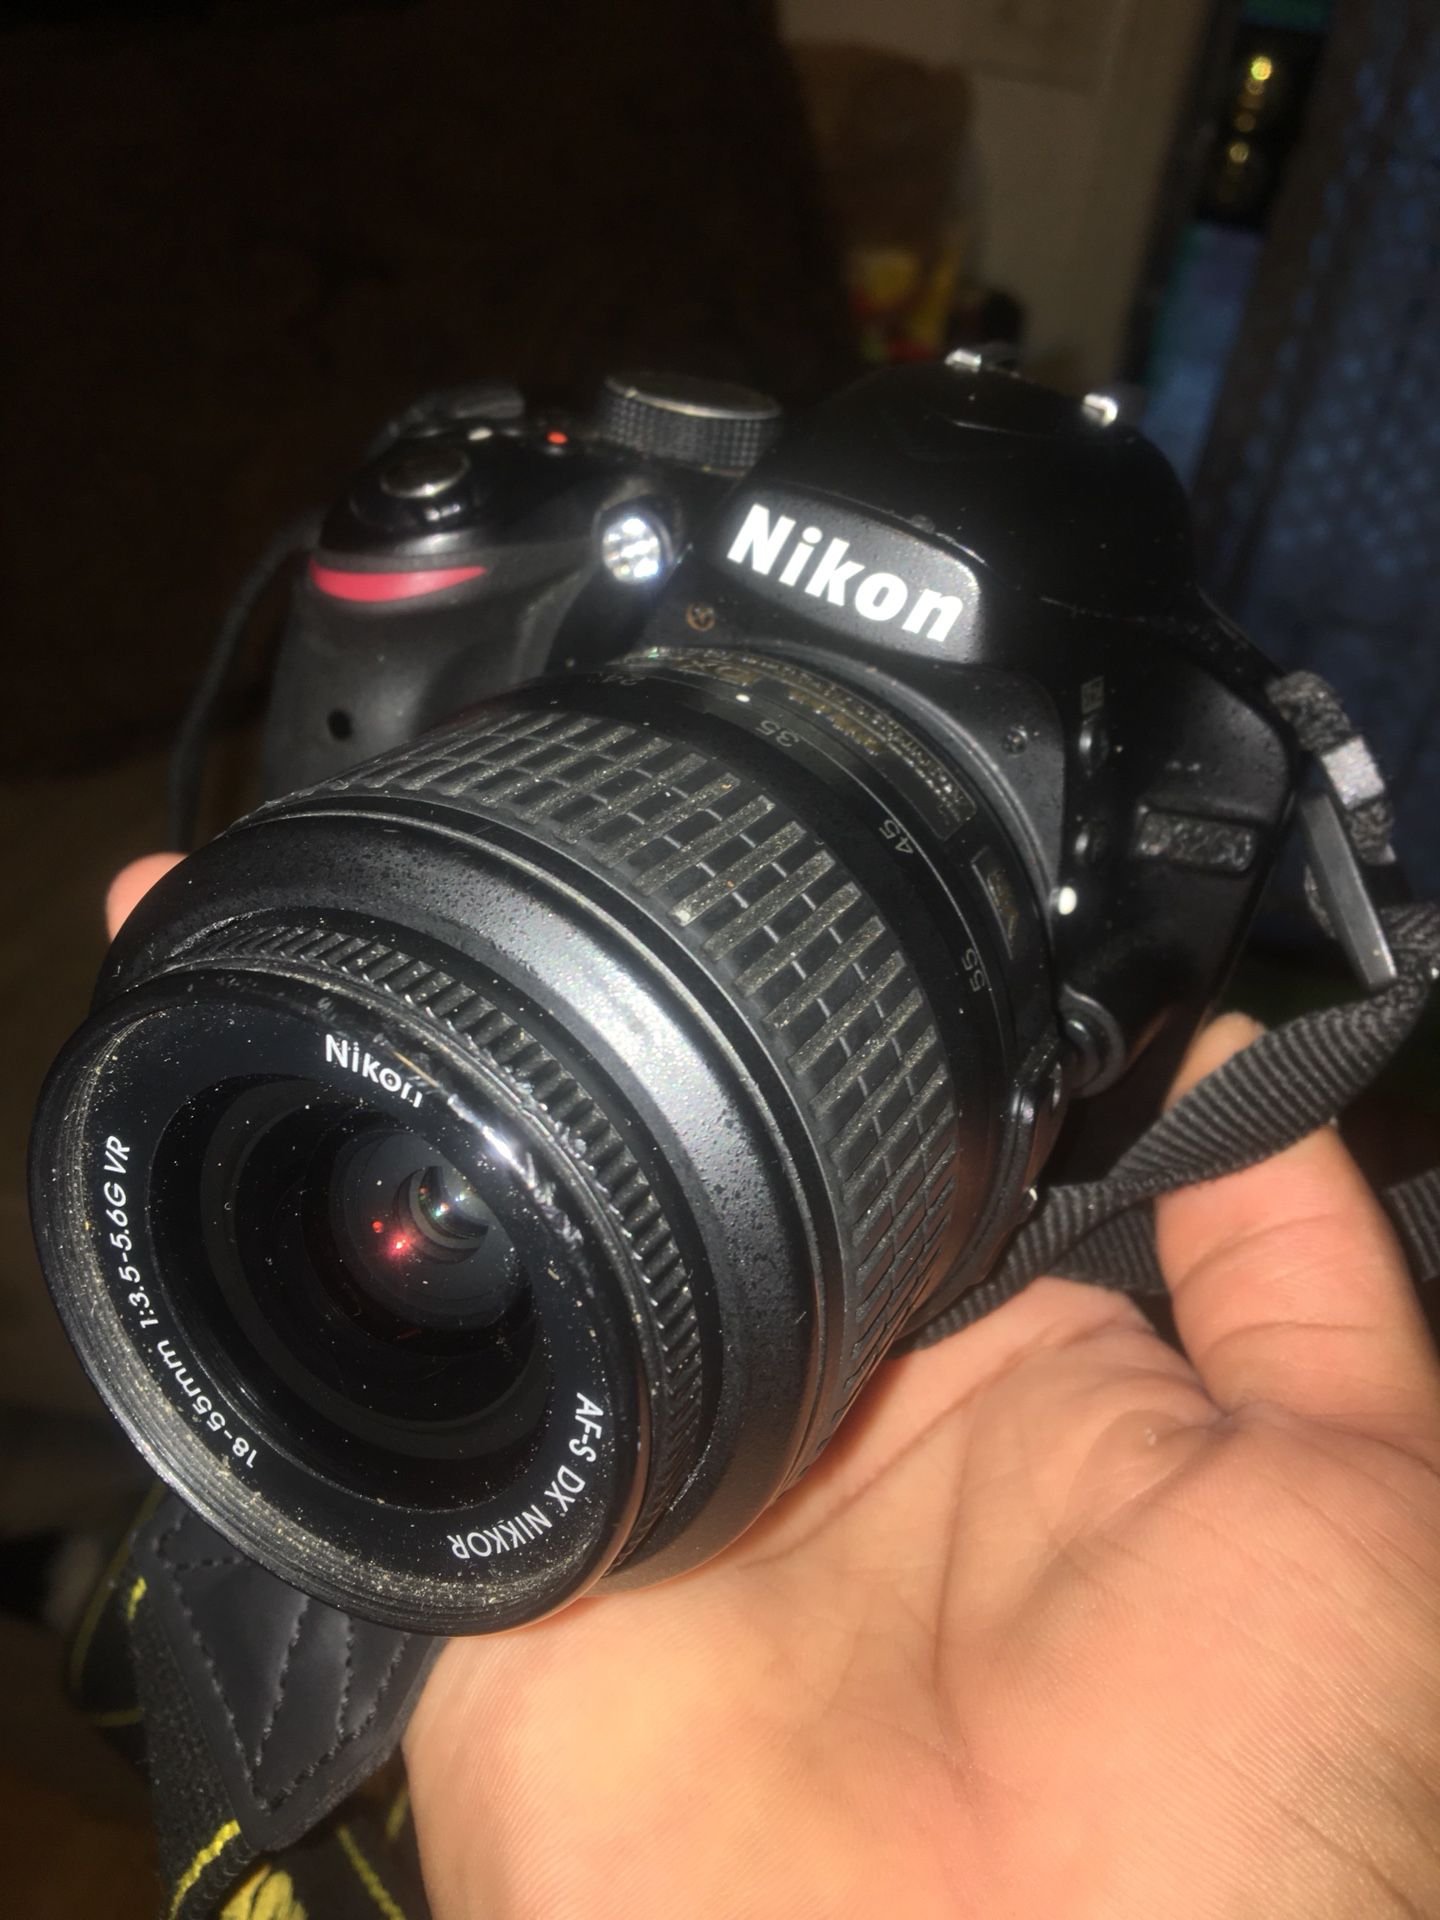 Nikon D-3200 used but very capable.